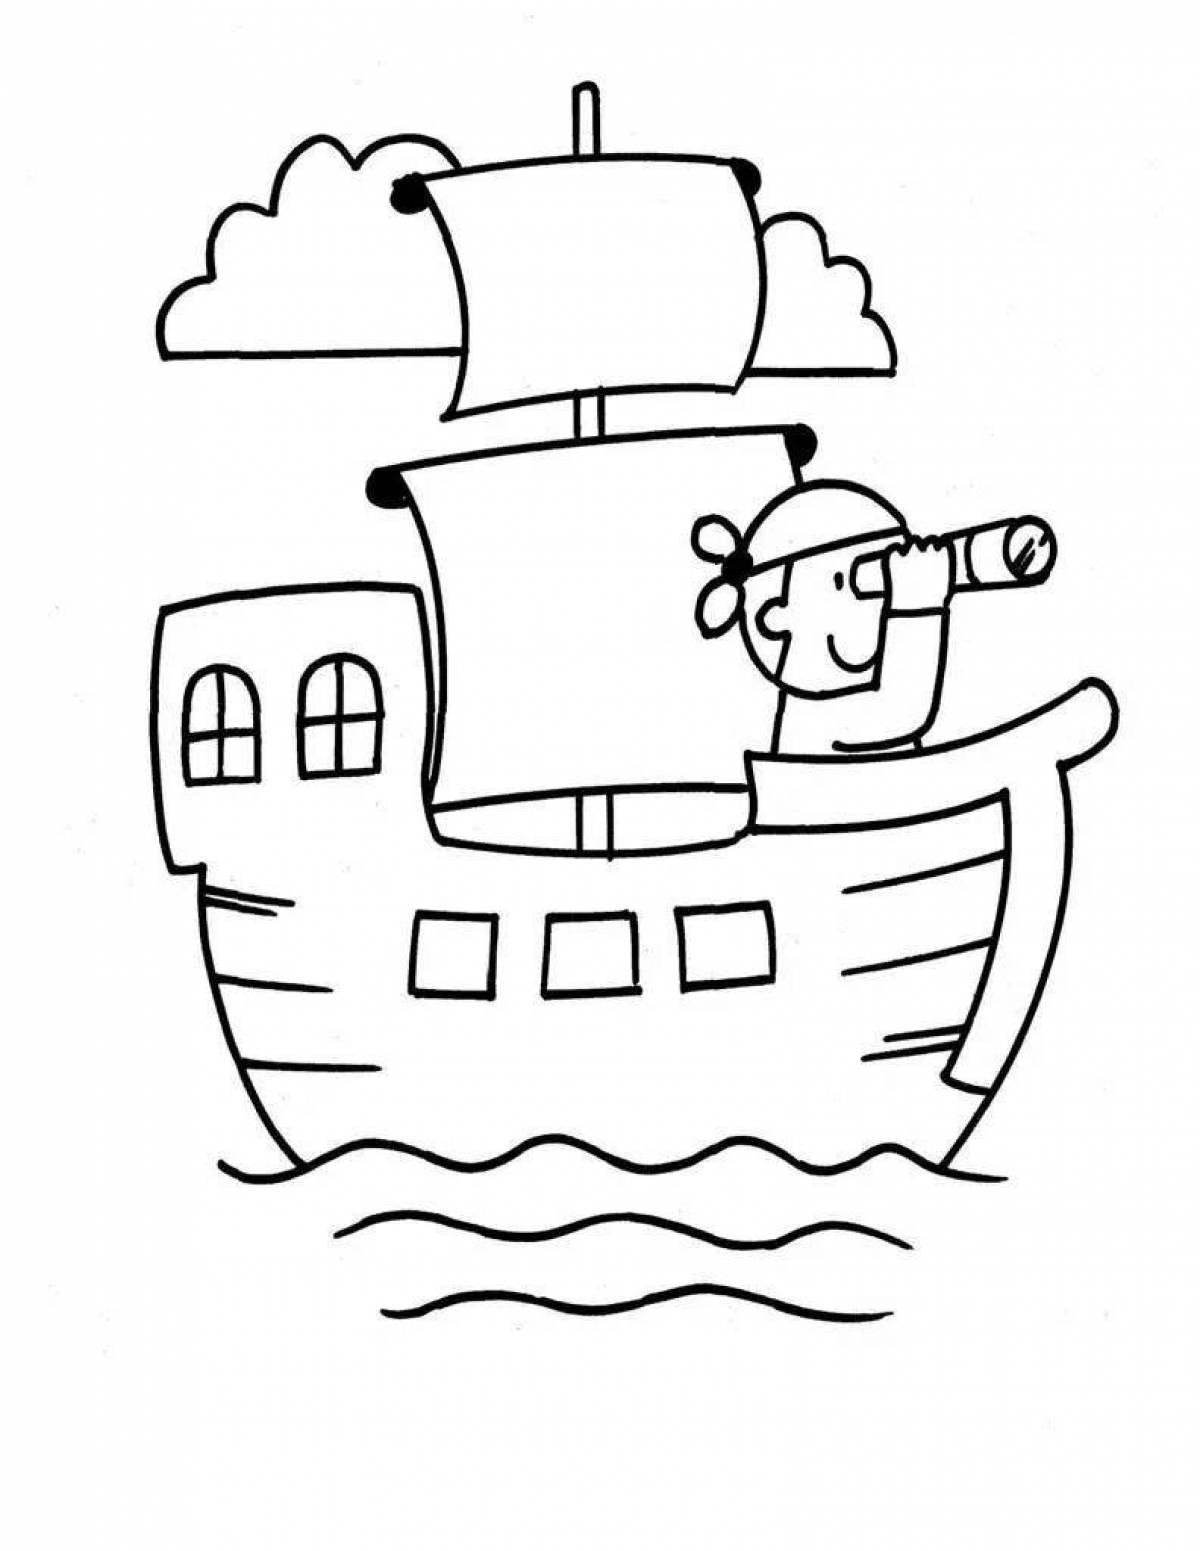 Exciting sailboat coloring book for preschoolers